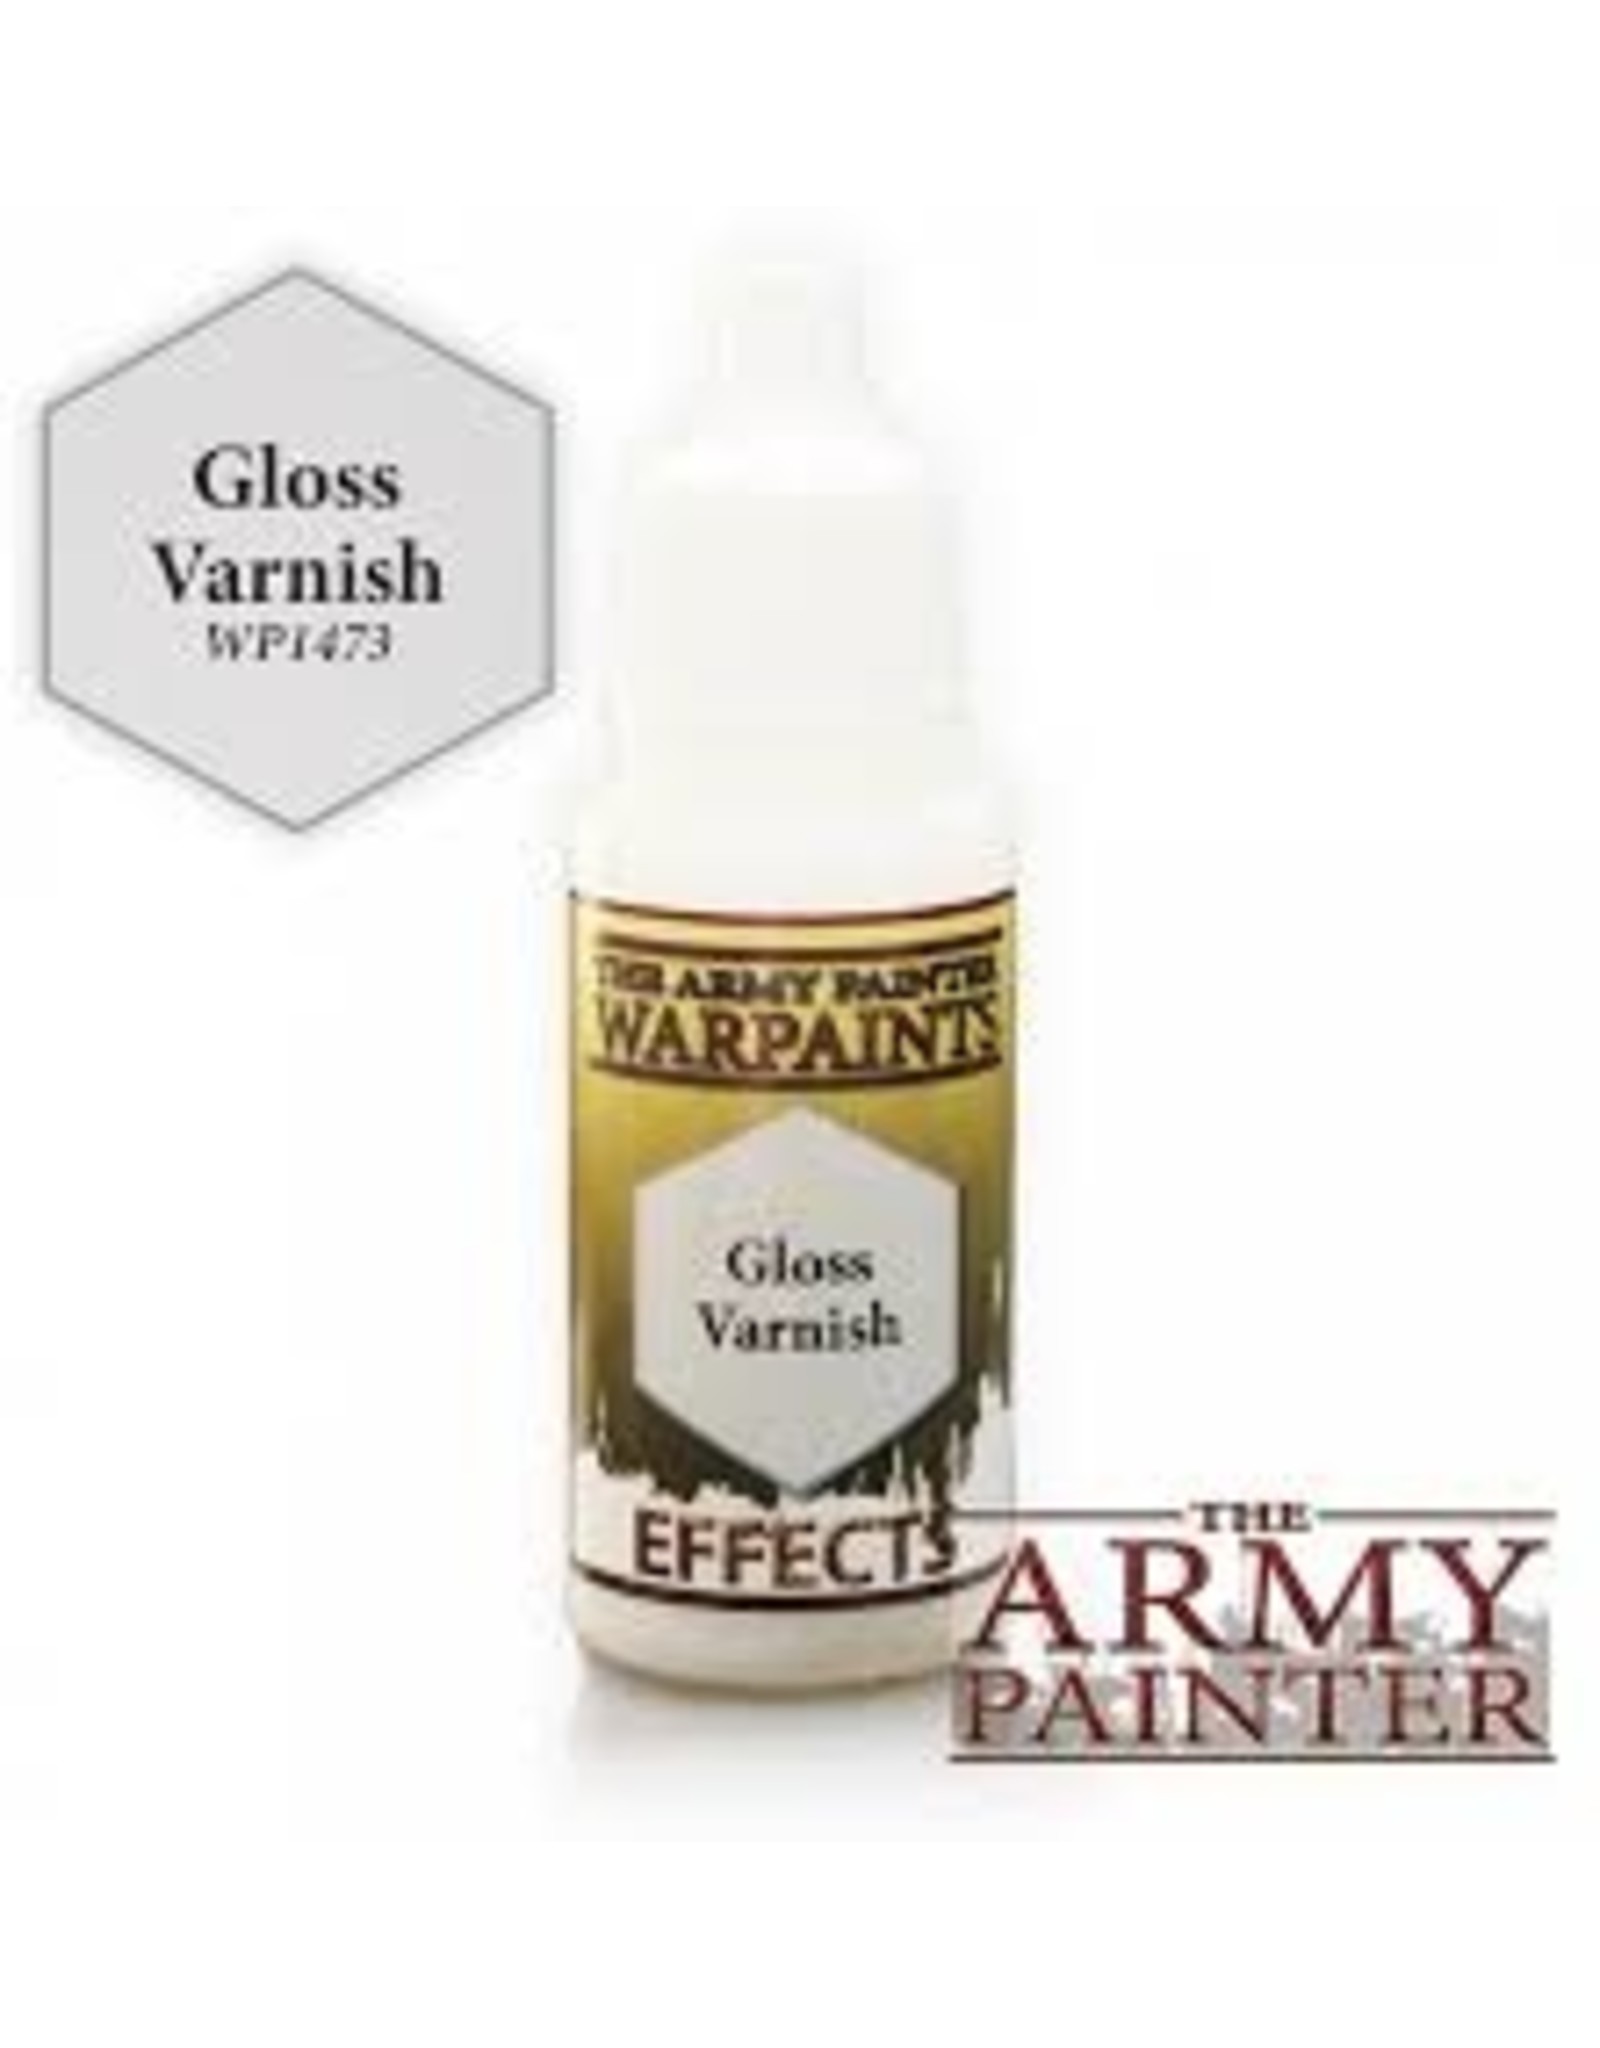 Army Painter Army Painter Effects: Gloss Varnish